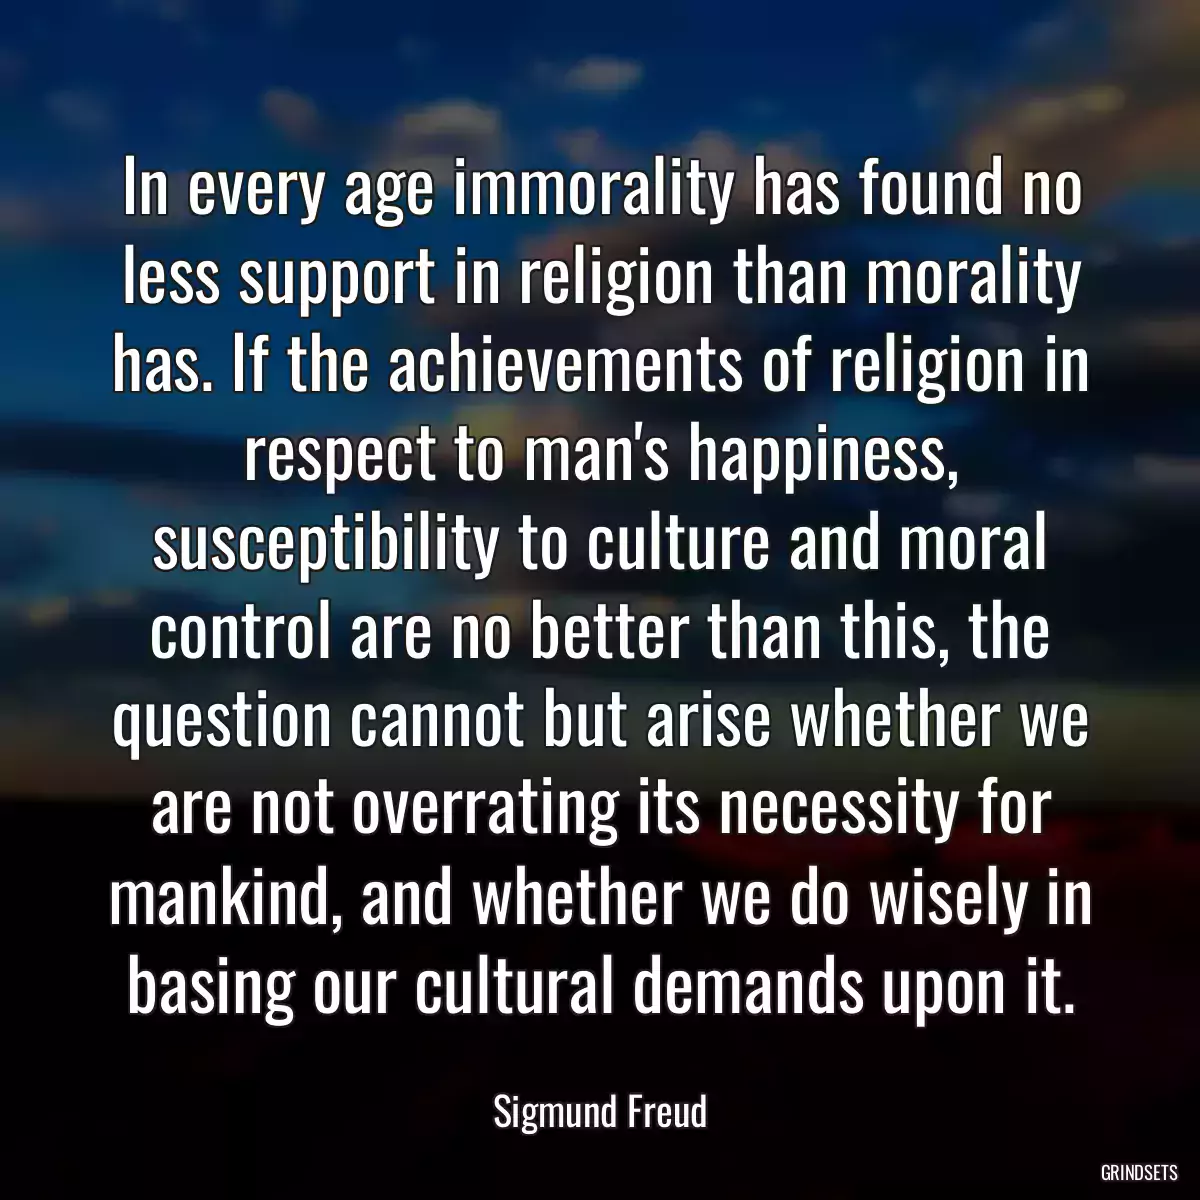 In every age immorality has found no less support in religion than morality has. If the achievements of religion in respect to man\'s happiness, susceptibility to culture and moral control are no better than this, the question cannot but arise whether we are not overrating its necessity for mankind, and whether we do wisely in basing our cultural demands upon it.